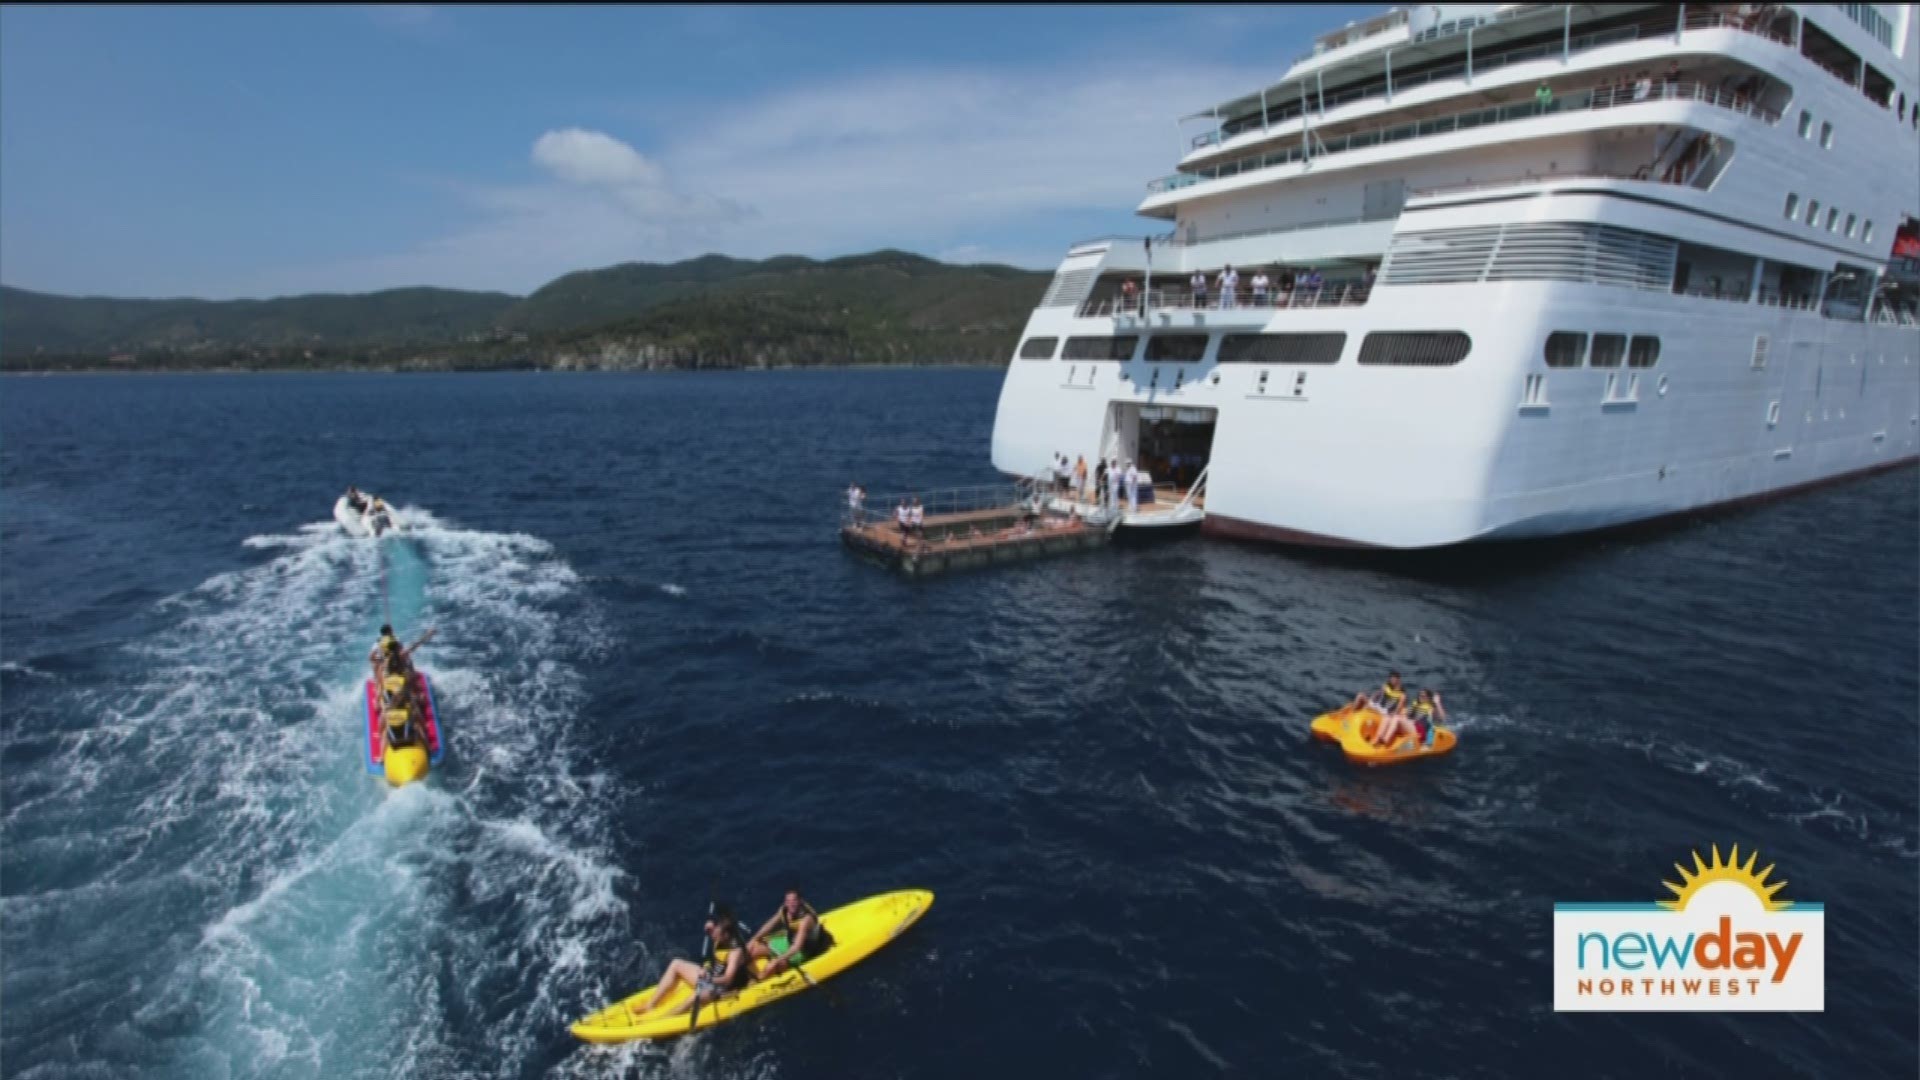 Cruise Season brings special discounts and added perks for travelers and first-time cruisers. Sponsored by AAA Washington.